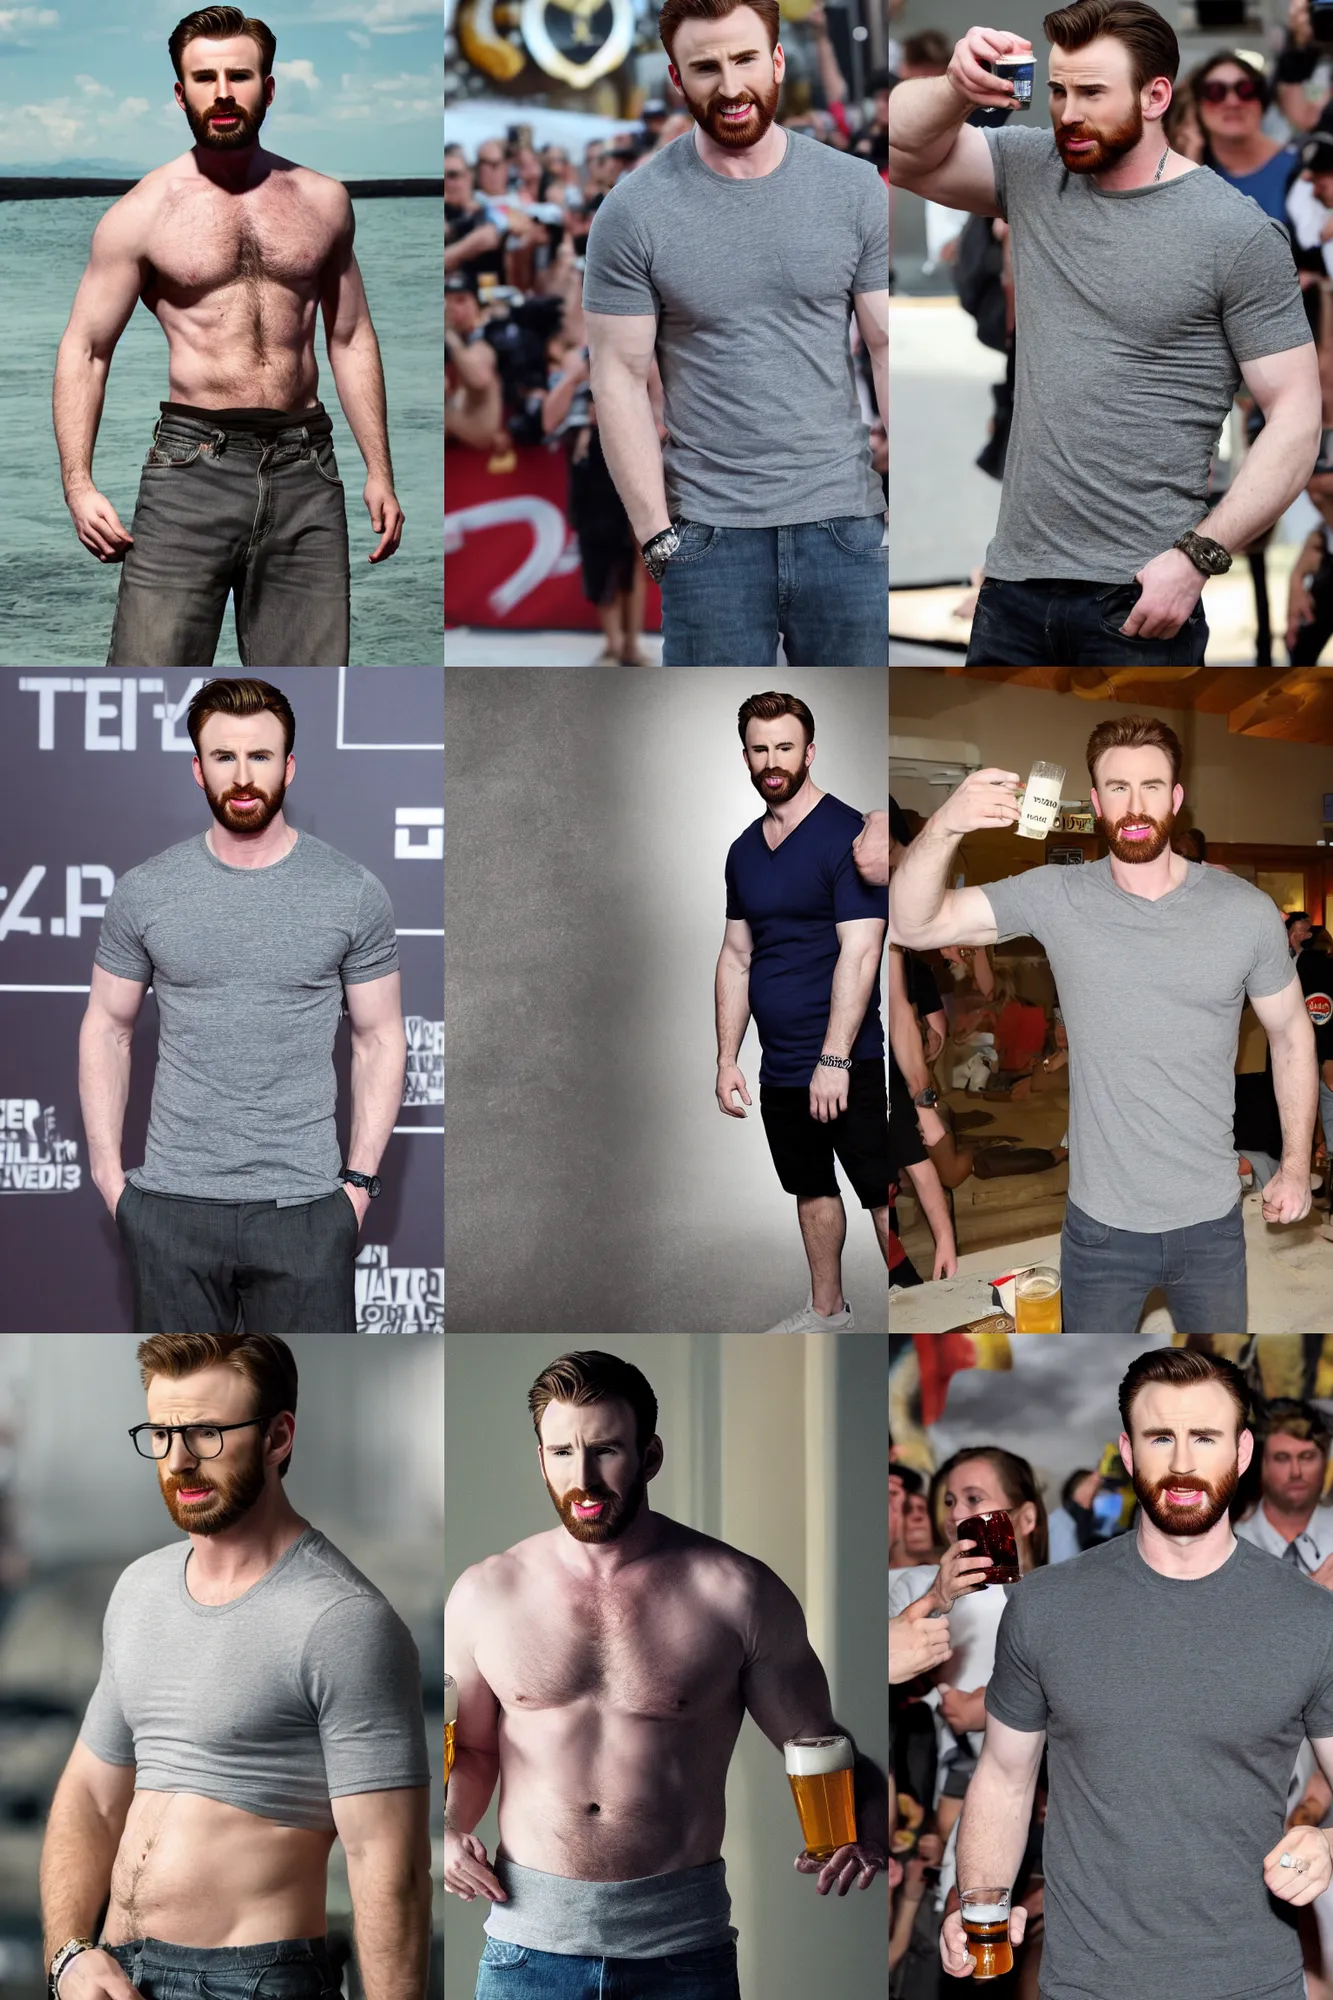 chris evans with a beer belly, tight shirt, 4 k hd